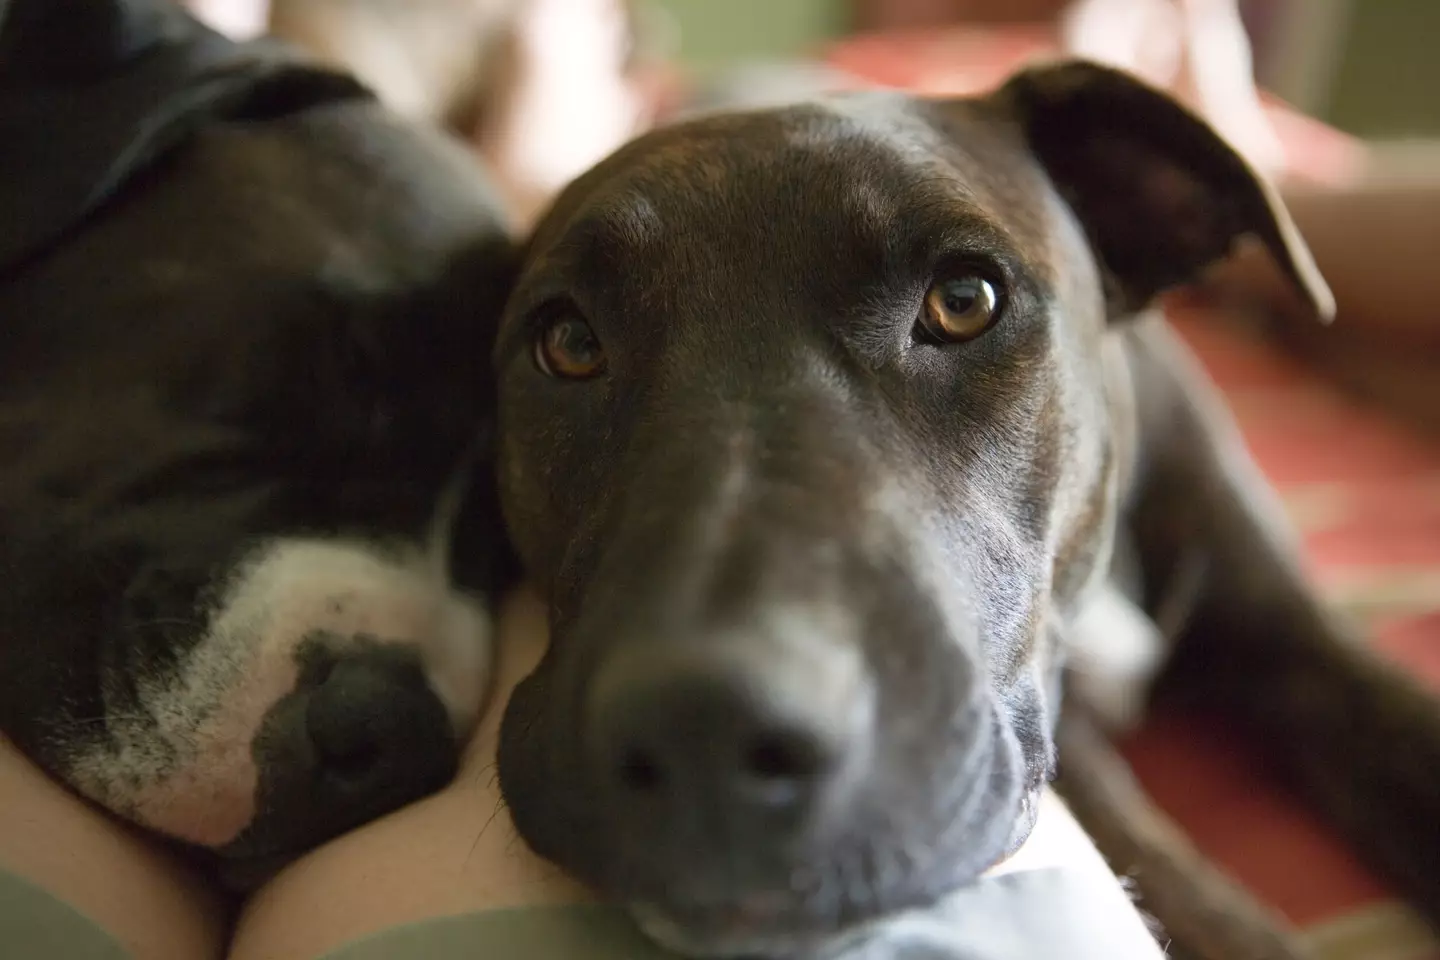 Dogs might also give their owners a longing stare. (